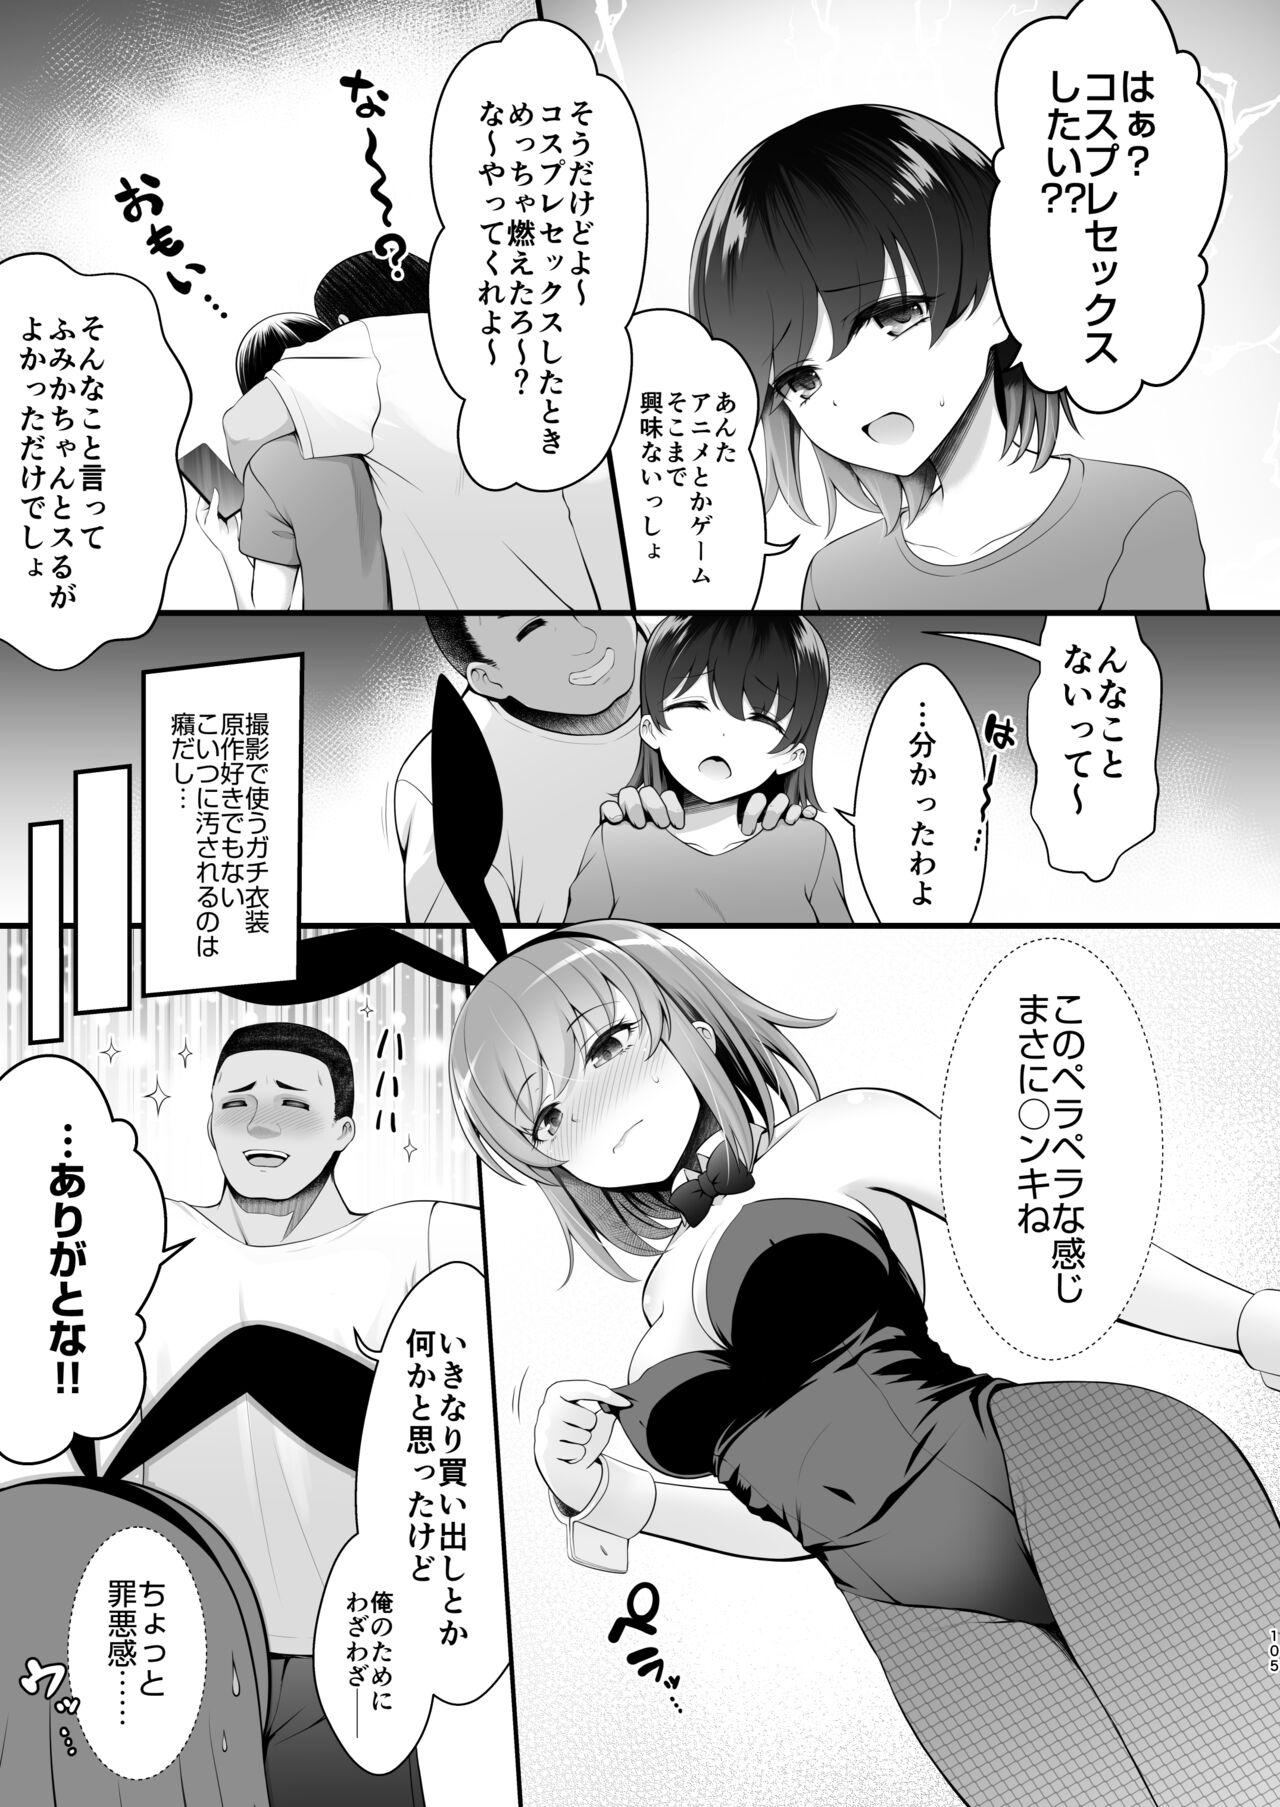 Boys Reverse bunny girl individual shooting in love hotel Black Thugs - Page 5